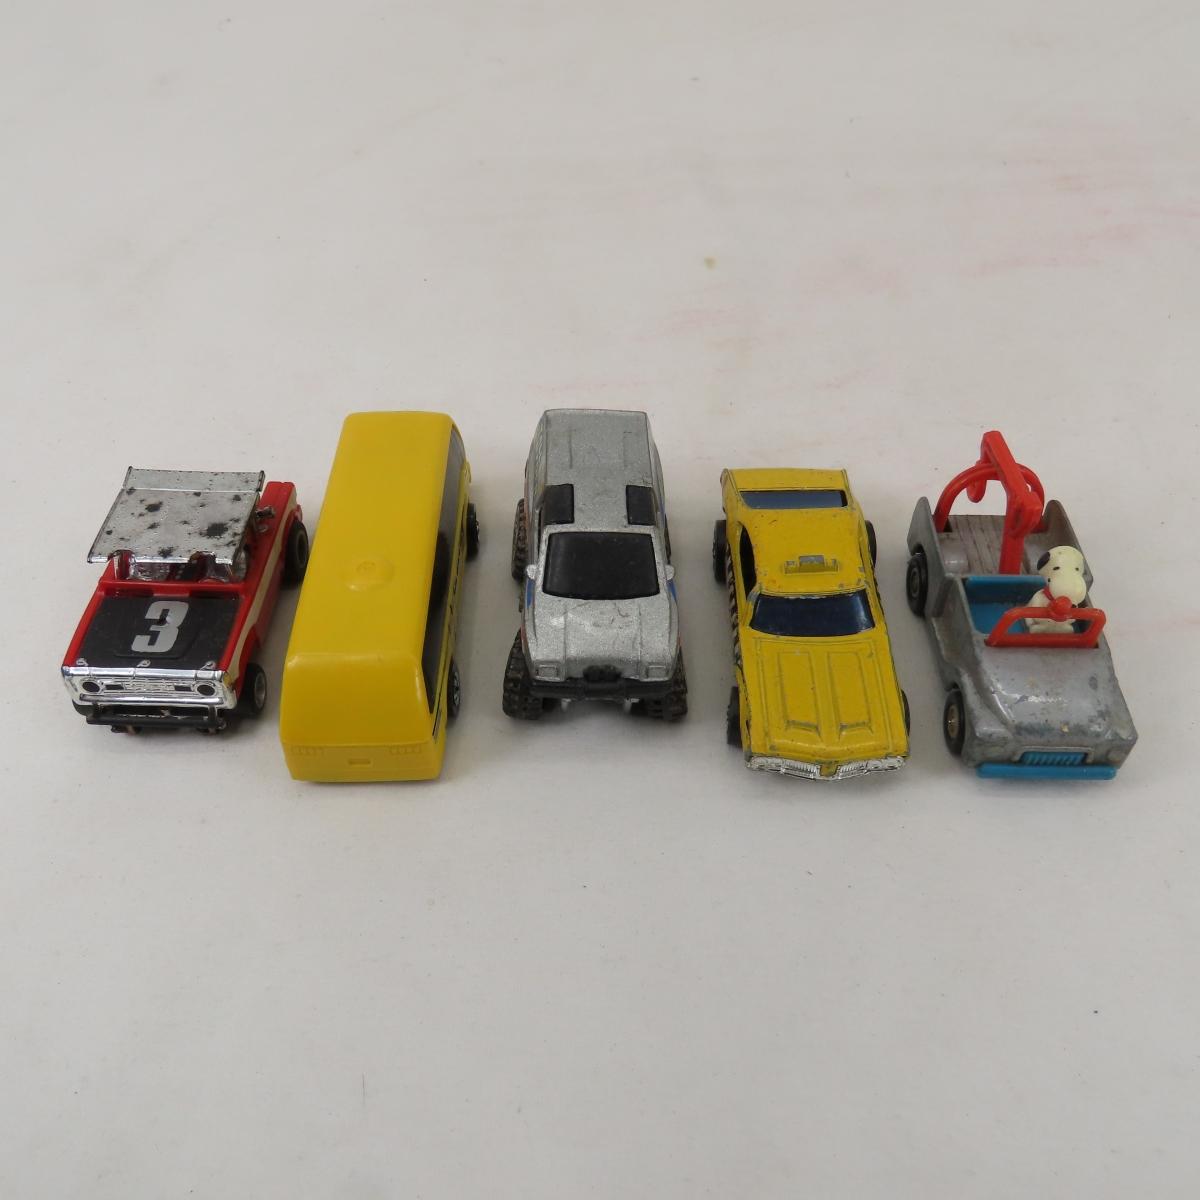 Hot Wheels, Matchbox and Other Diecast Vehicles